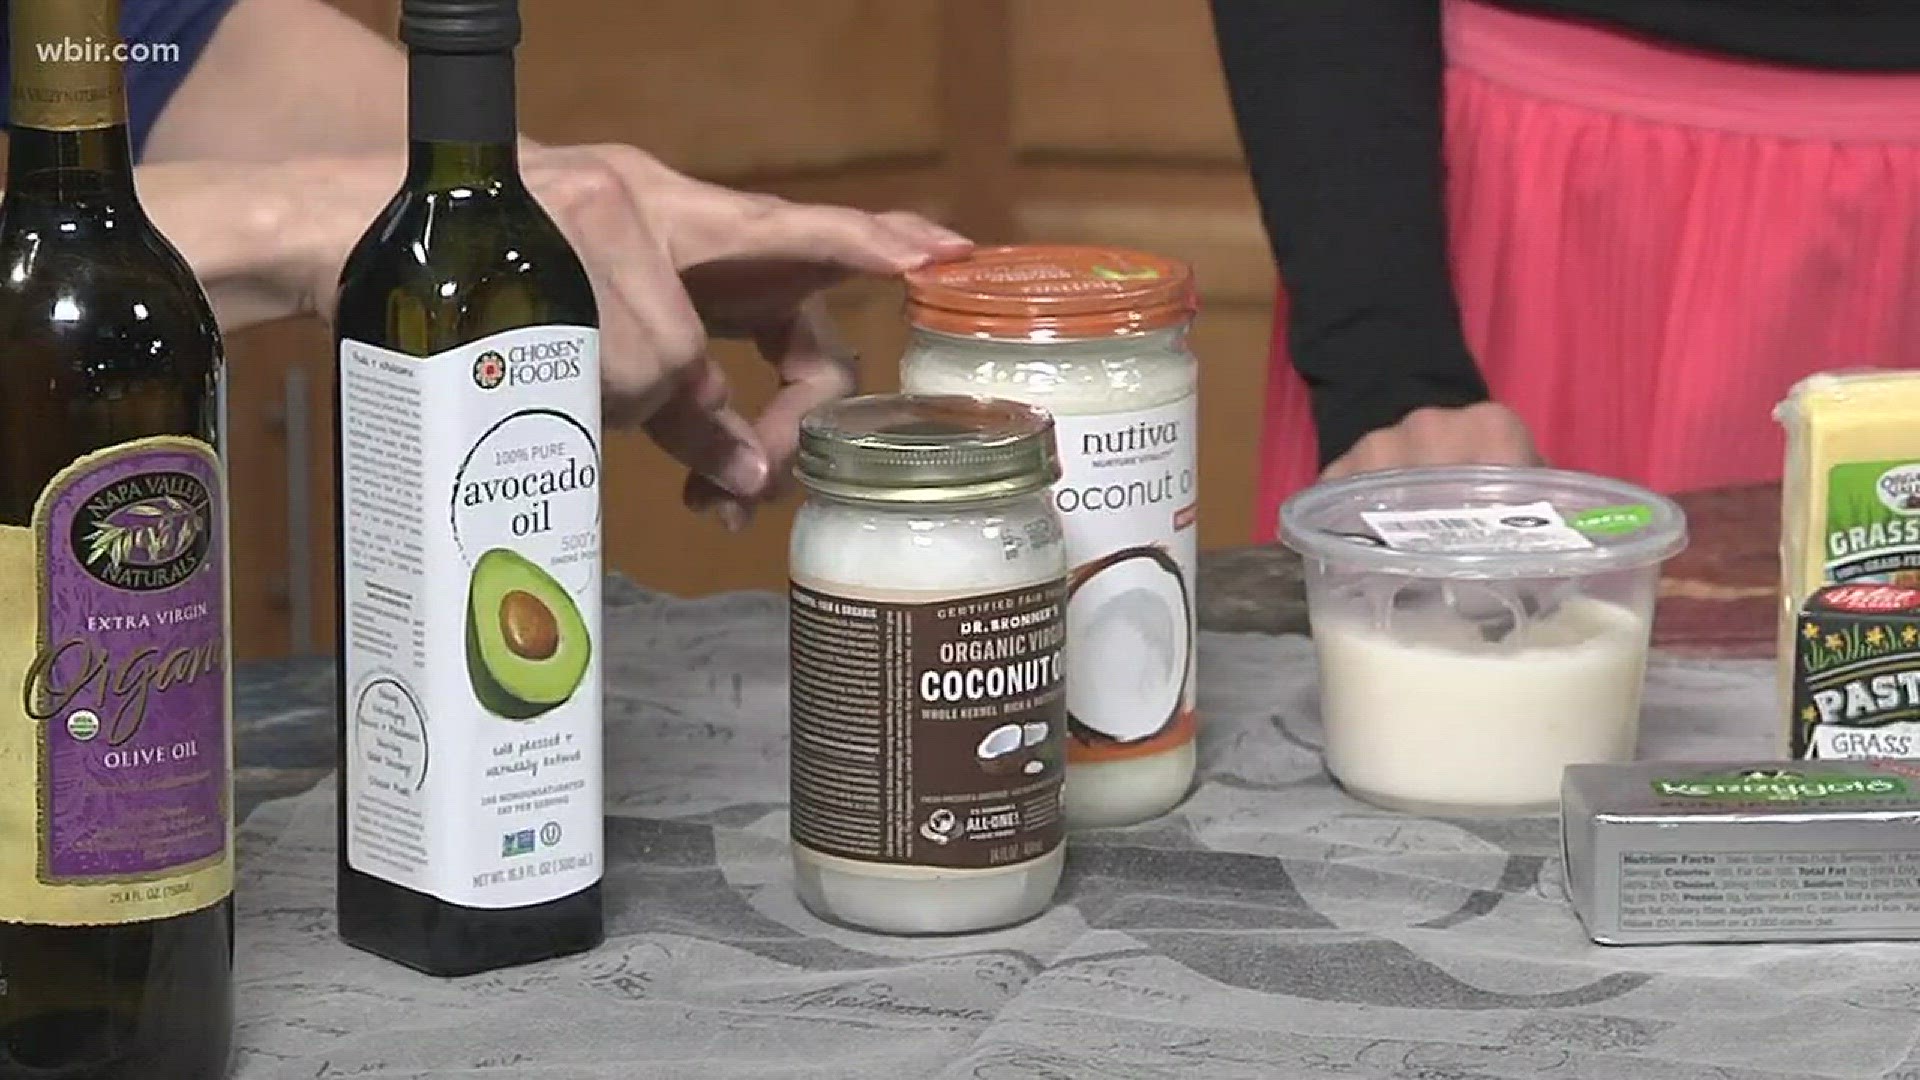 Health coach Camille Watson explains what healthy fats are.